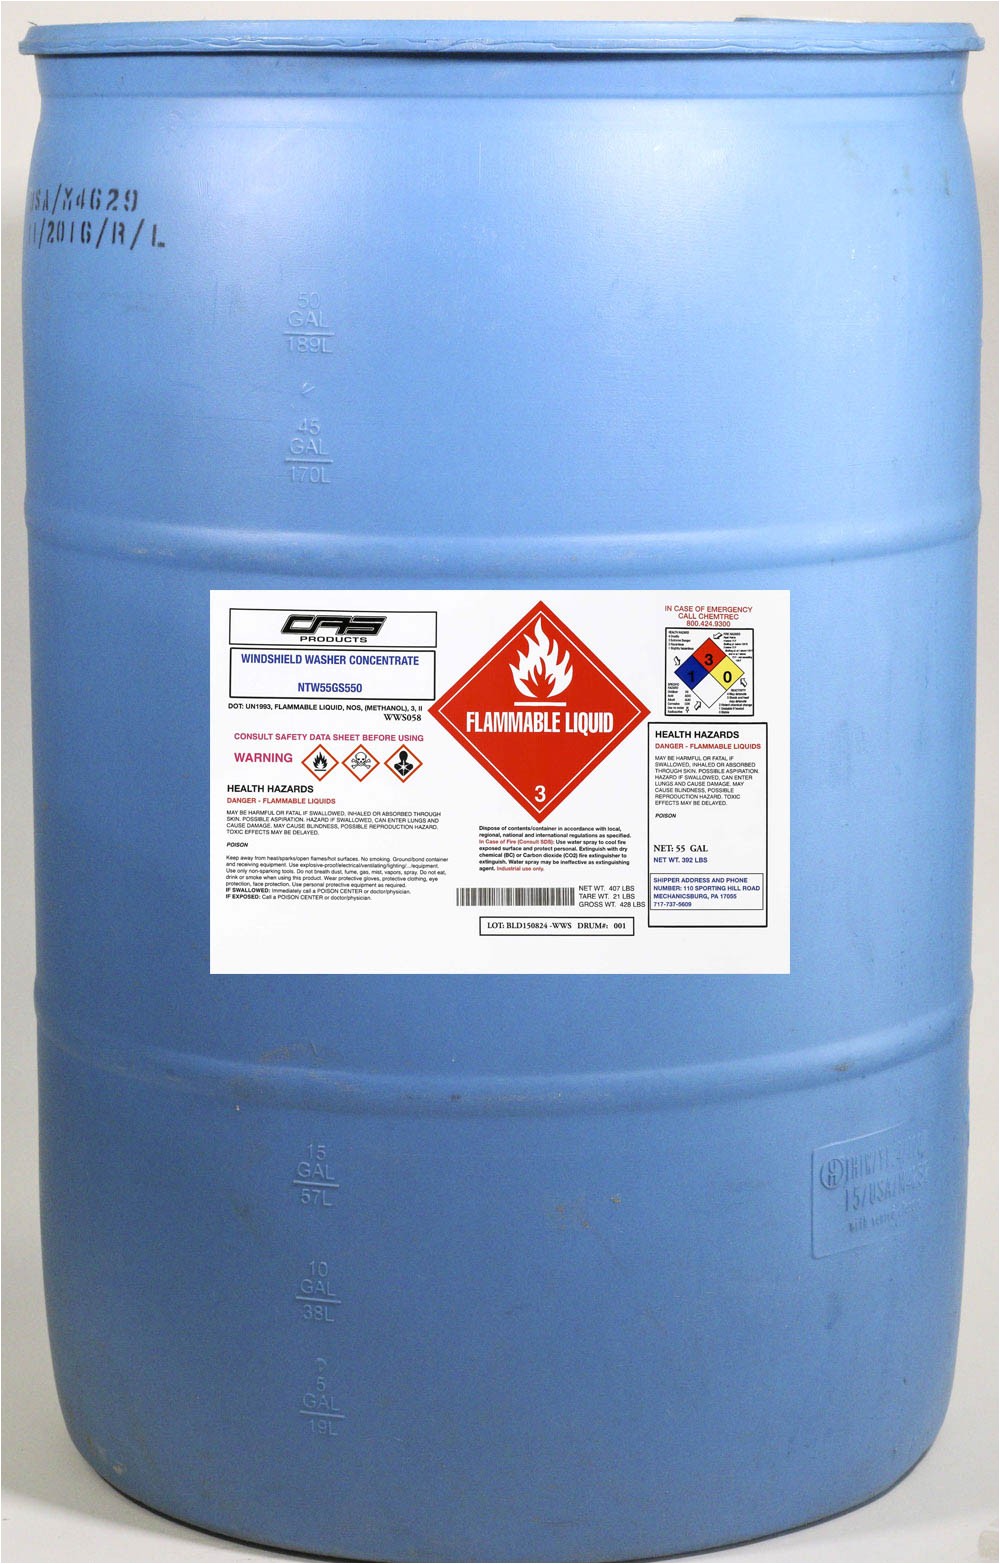 55gs559 windshield wash fluid 55 gallon wws059 concentrate flammable